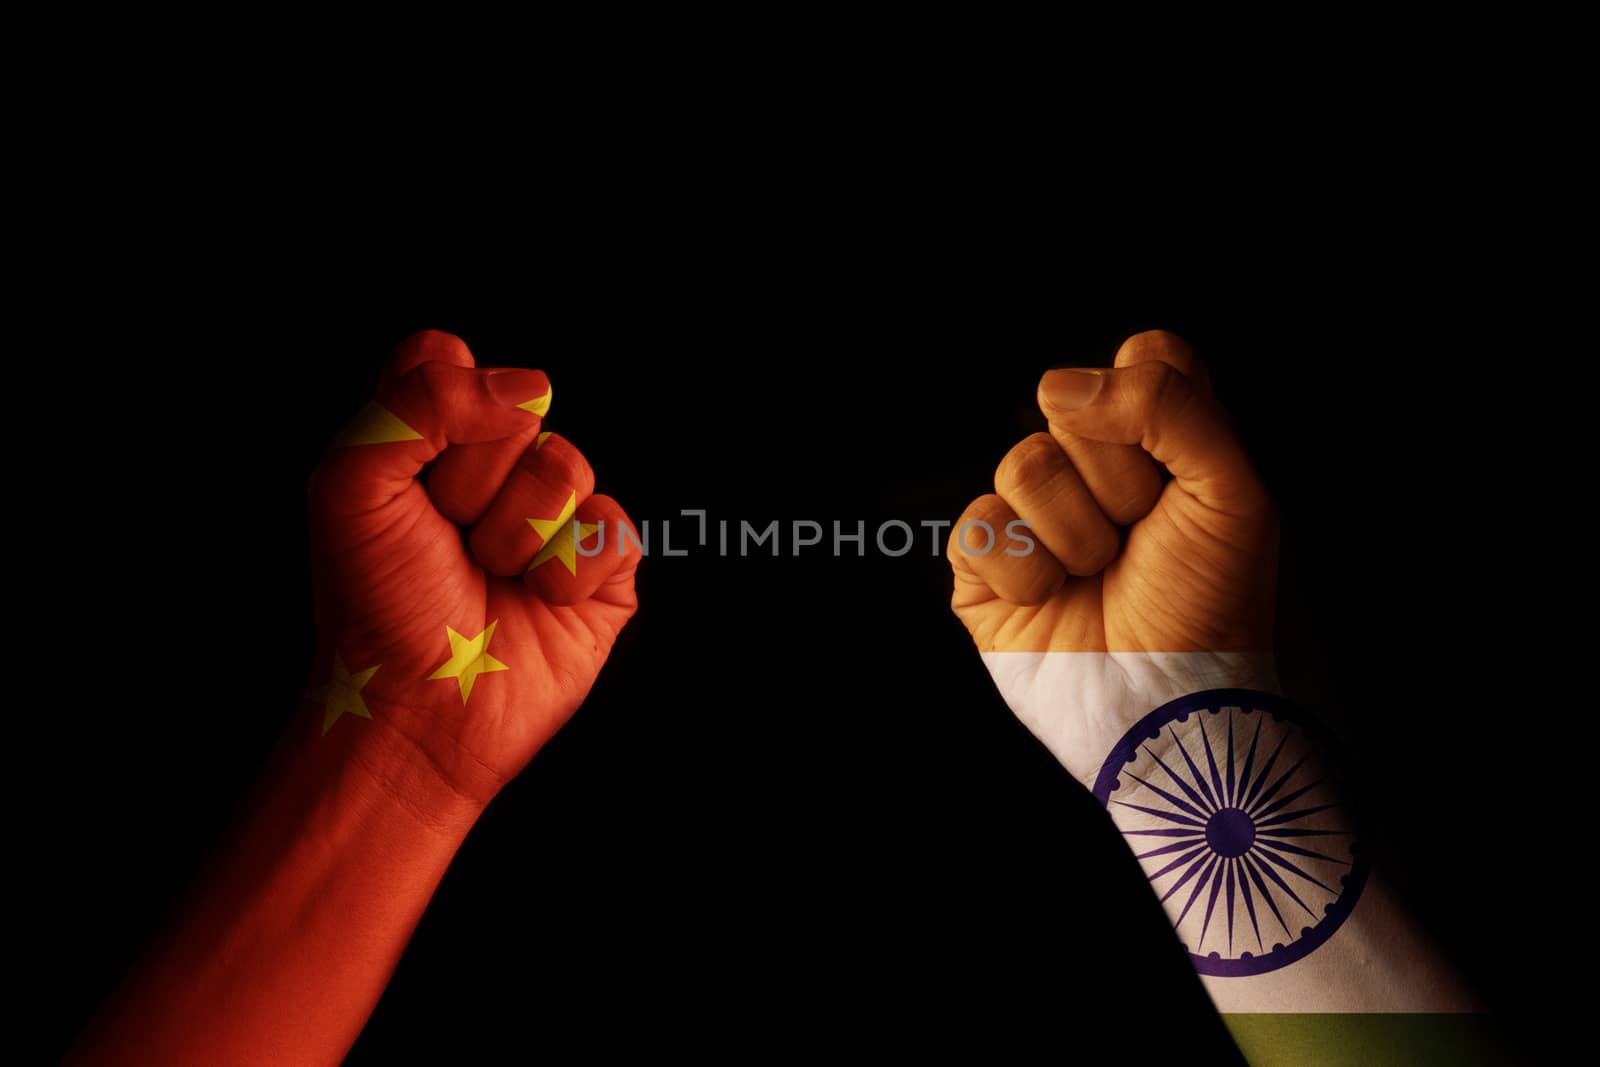 Concept of Dispute or conflict between India and China showing with fist hands